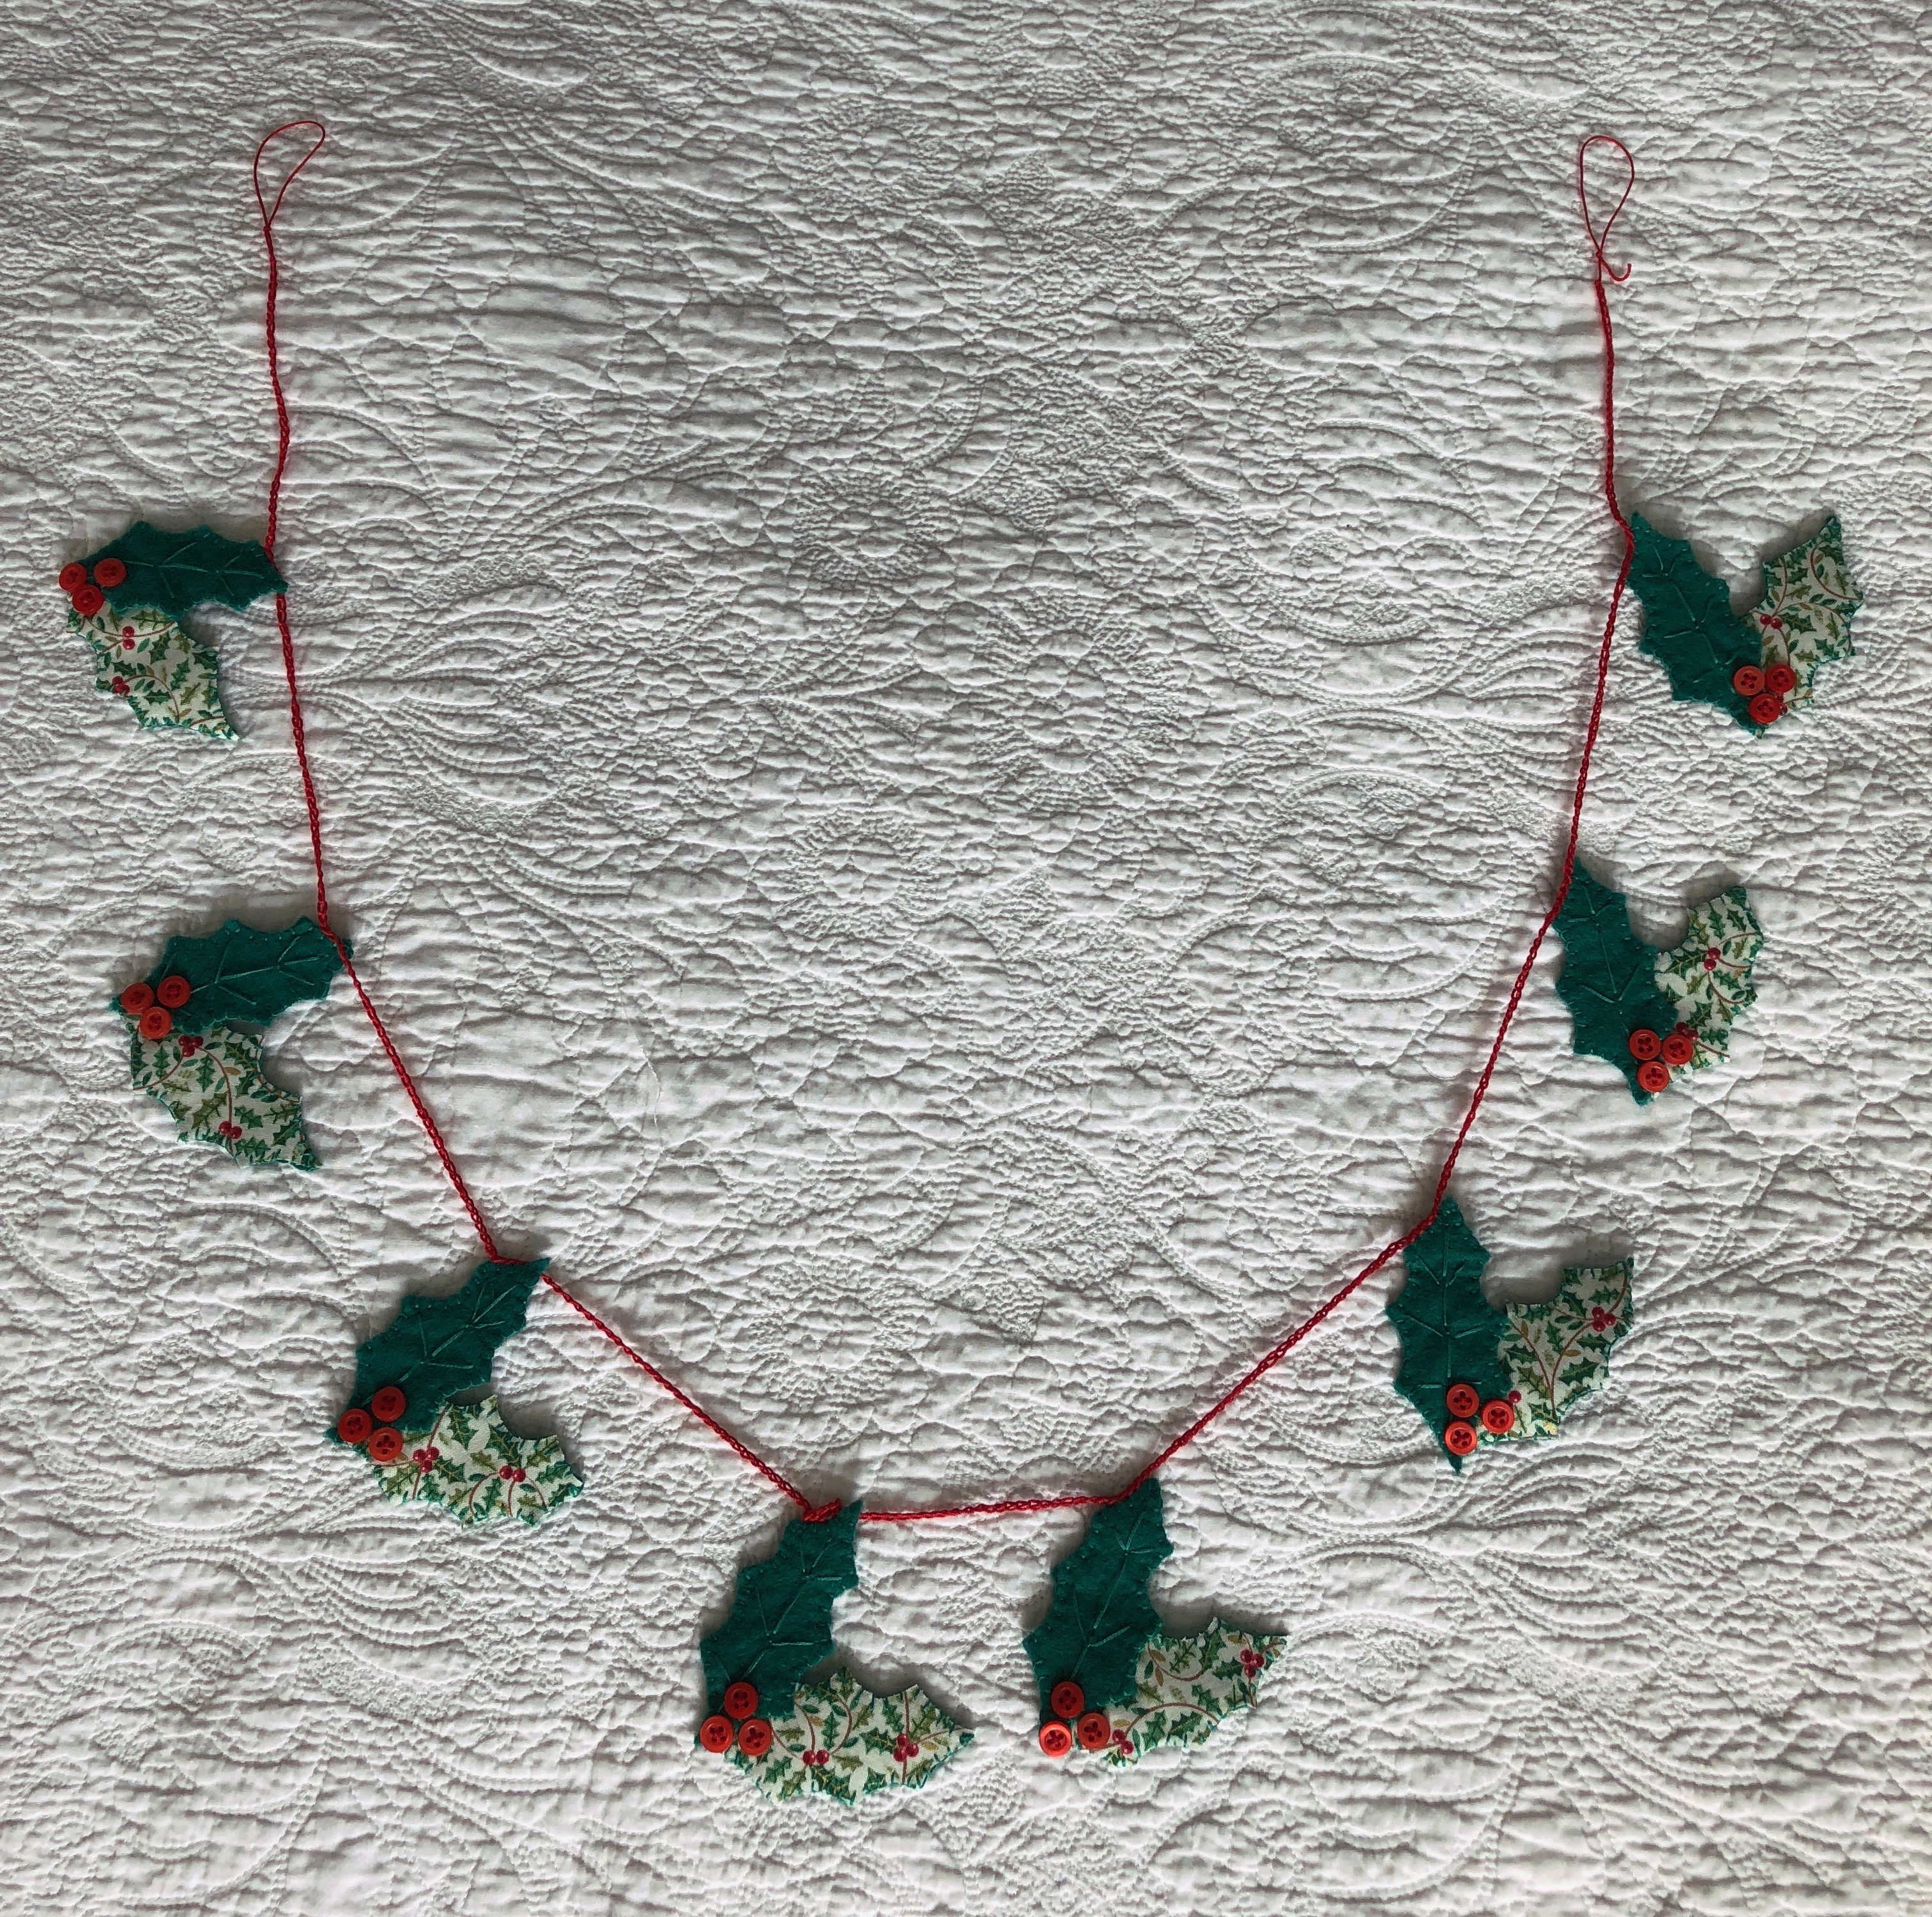 A handmade, hand stitched garland of green felt and holly printed cotton fabric holly leaves with red button berries.